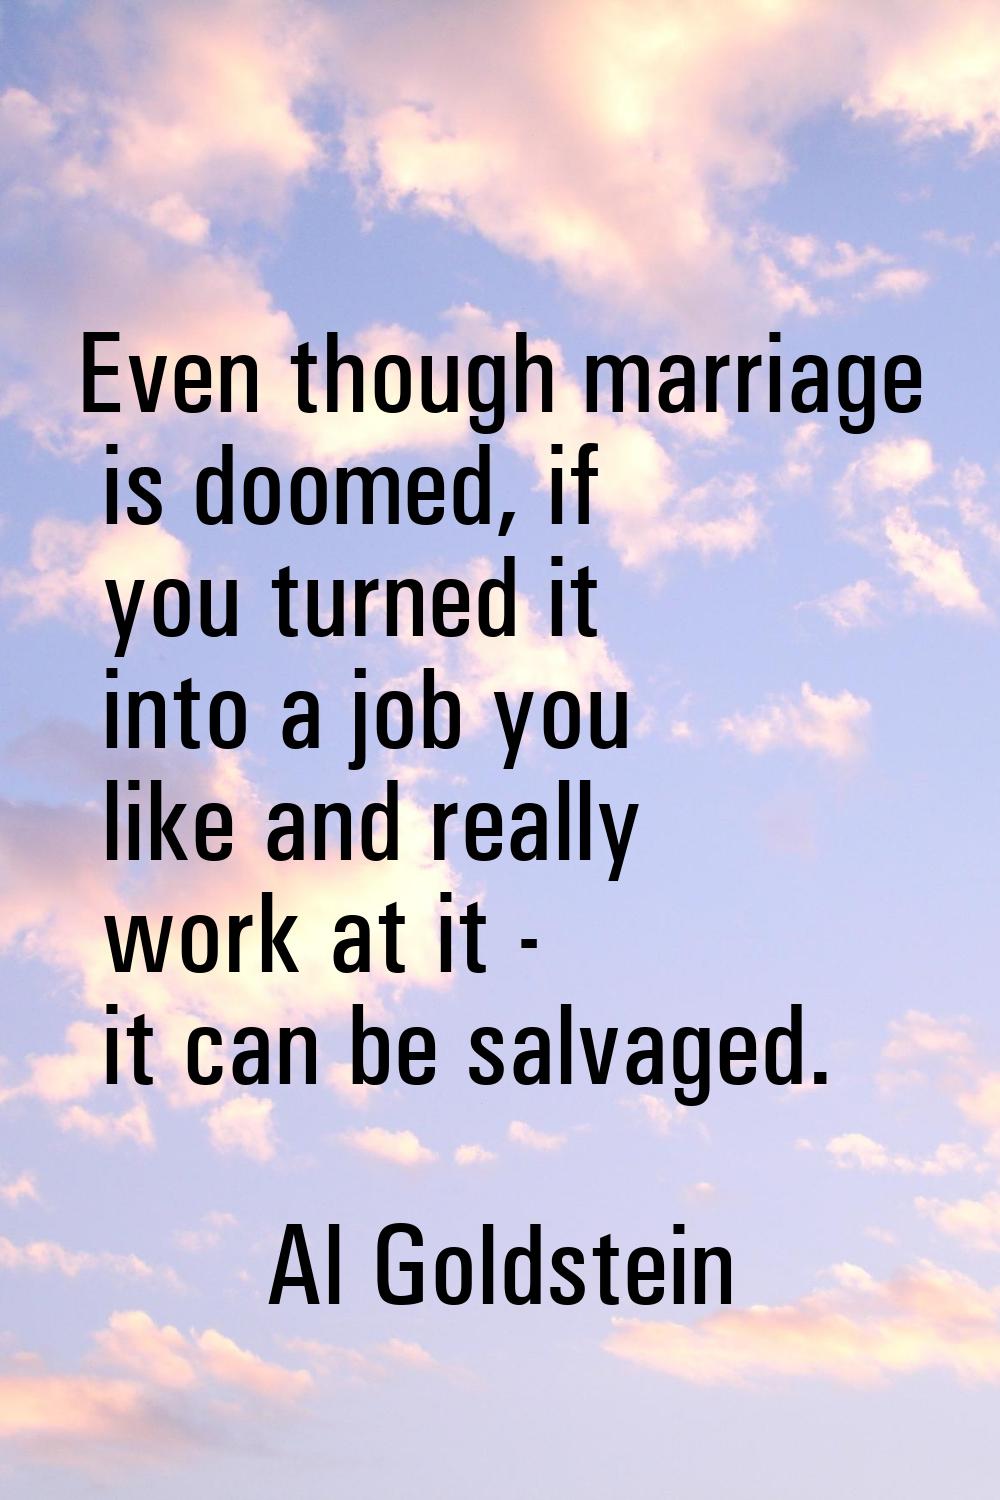 Even though marriage is doomed, if you turned it into a job you like and really work at it - it can